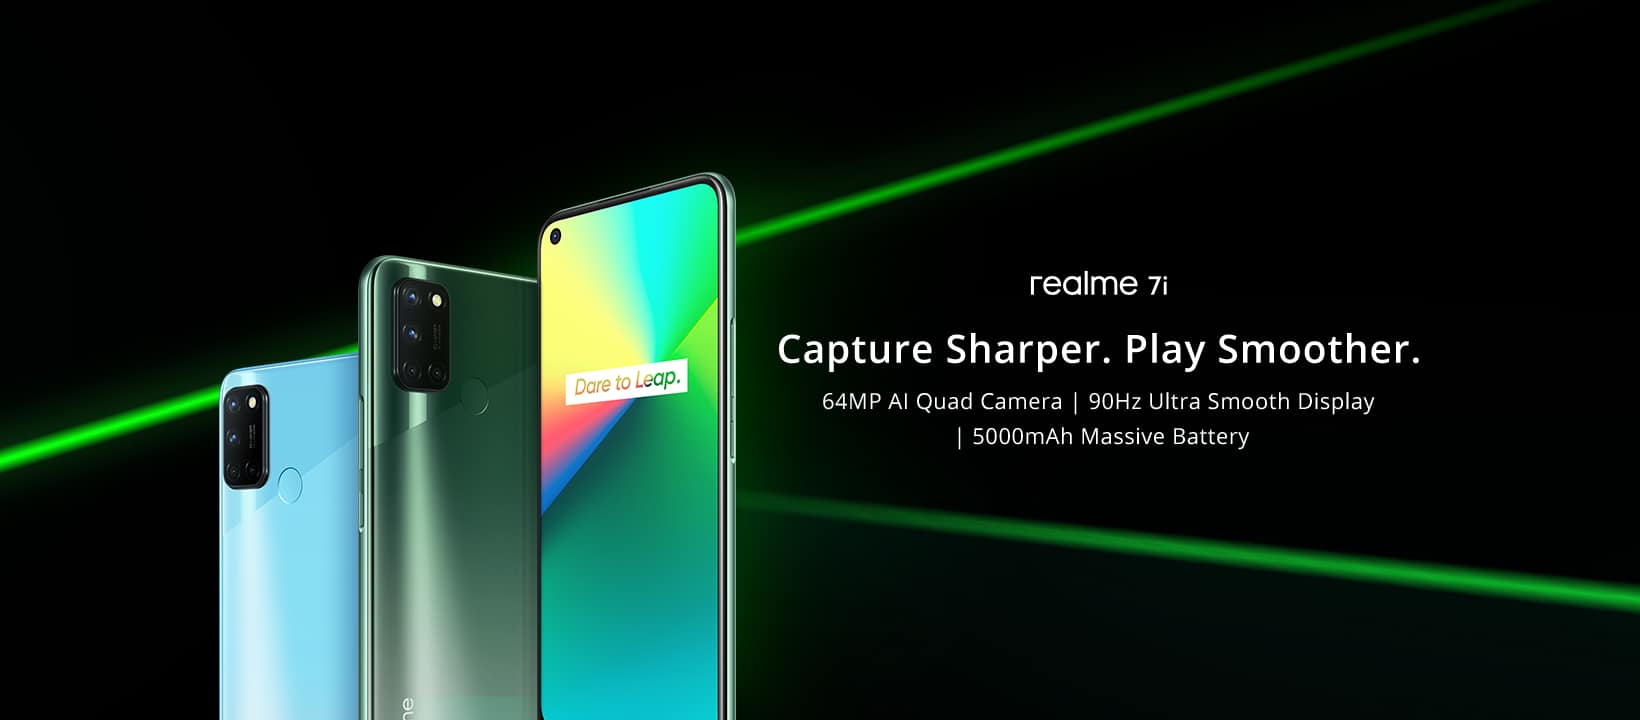 realme becomes fastest smartphone brand to reach 50 million product sales